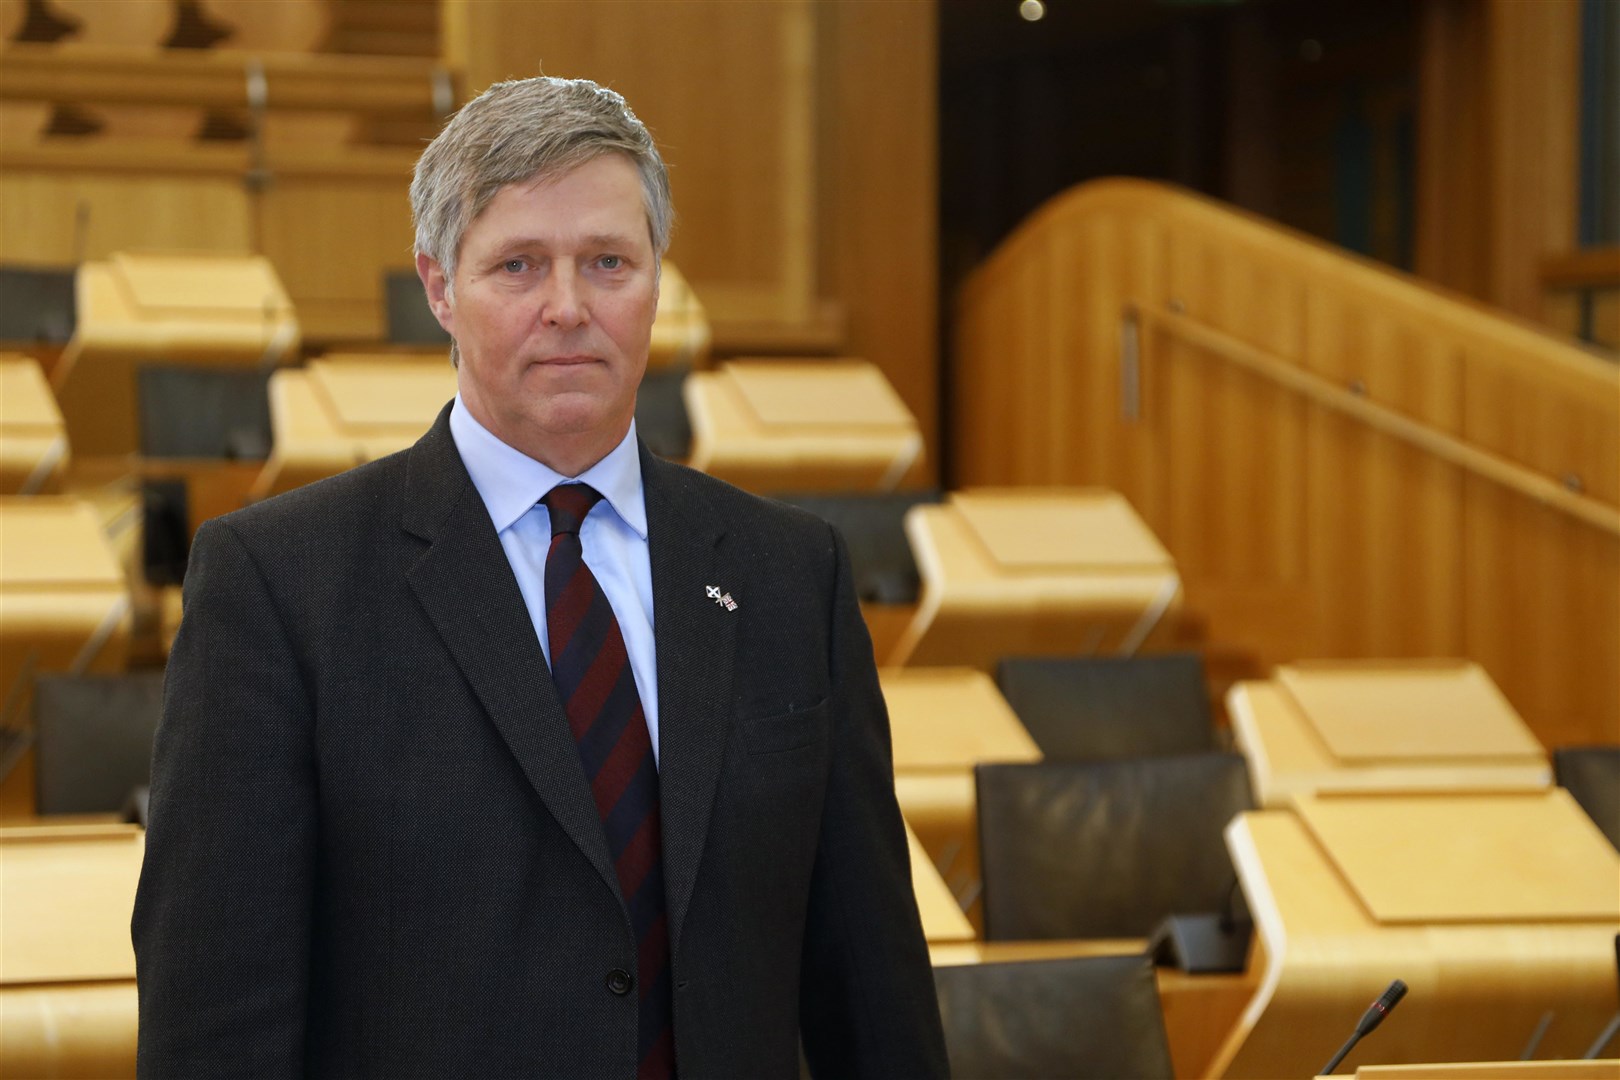 Edward Mountain MSP has blasted HIE's running of Cairngorm Mountain.